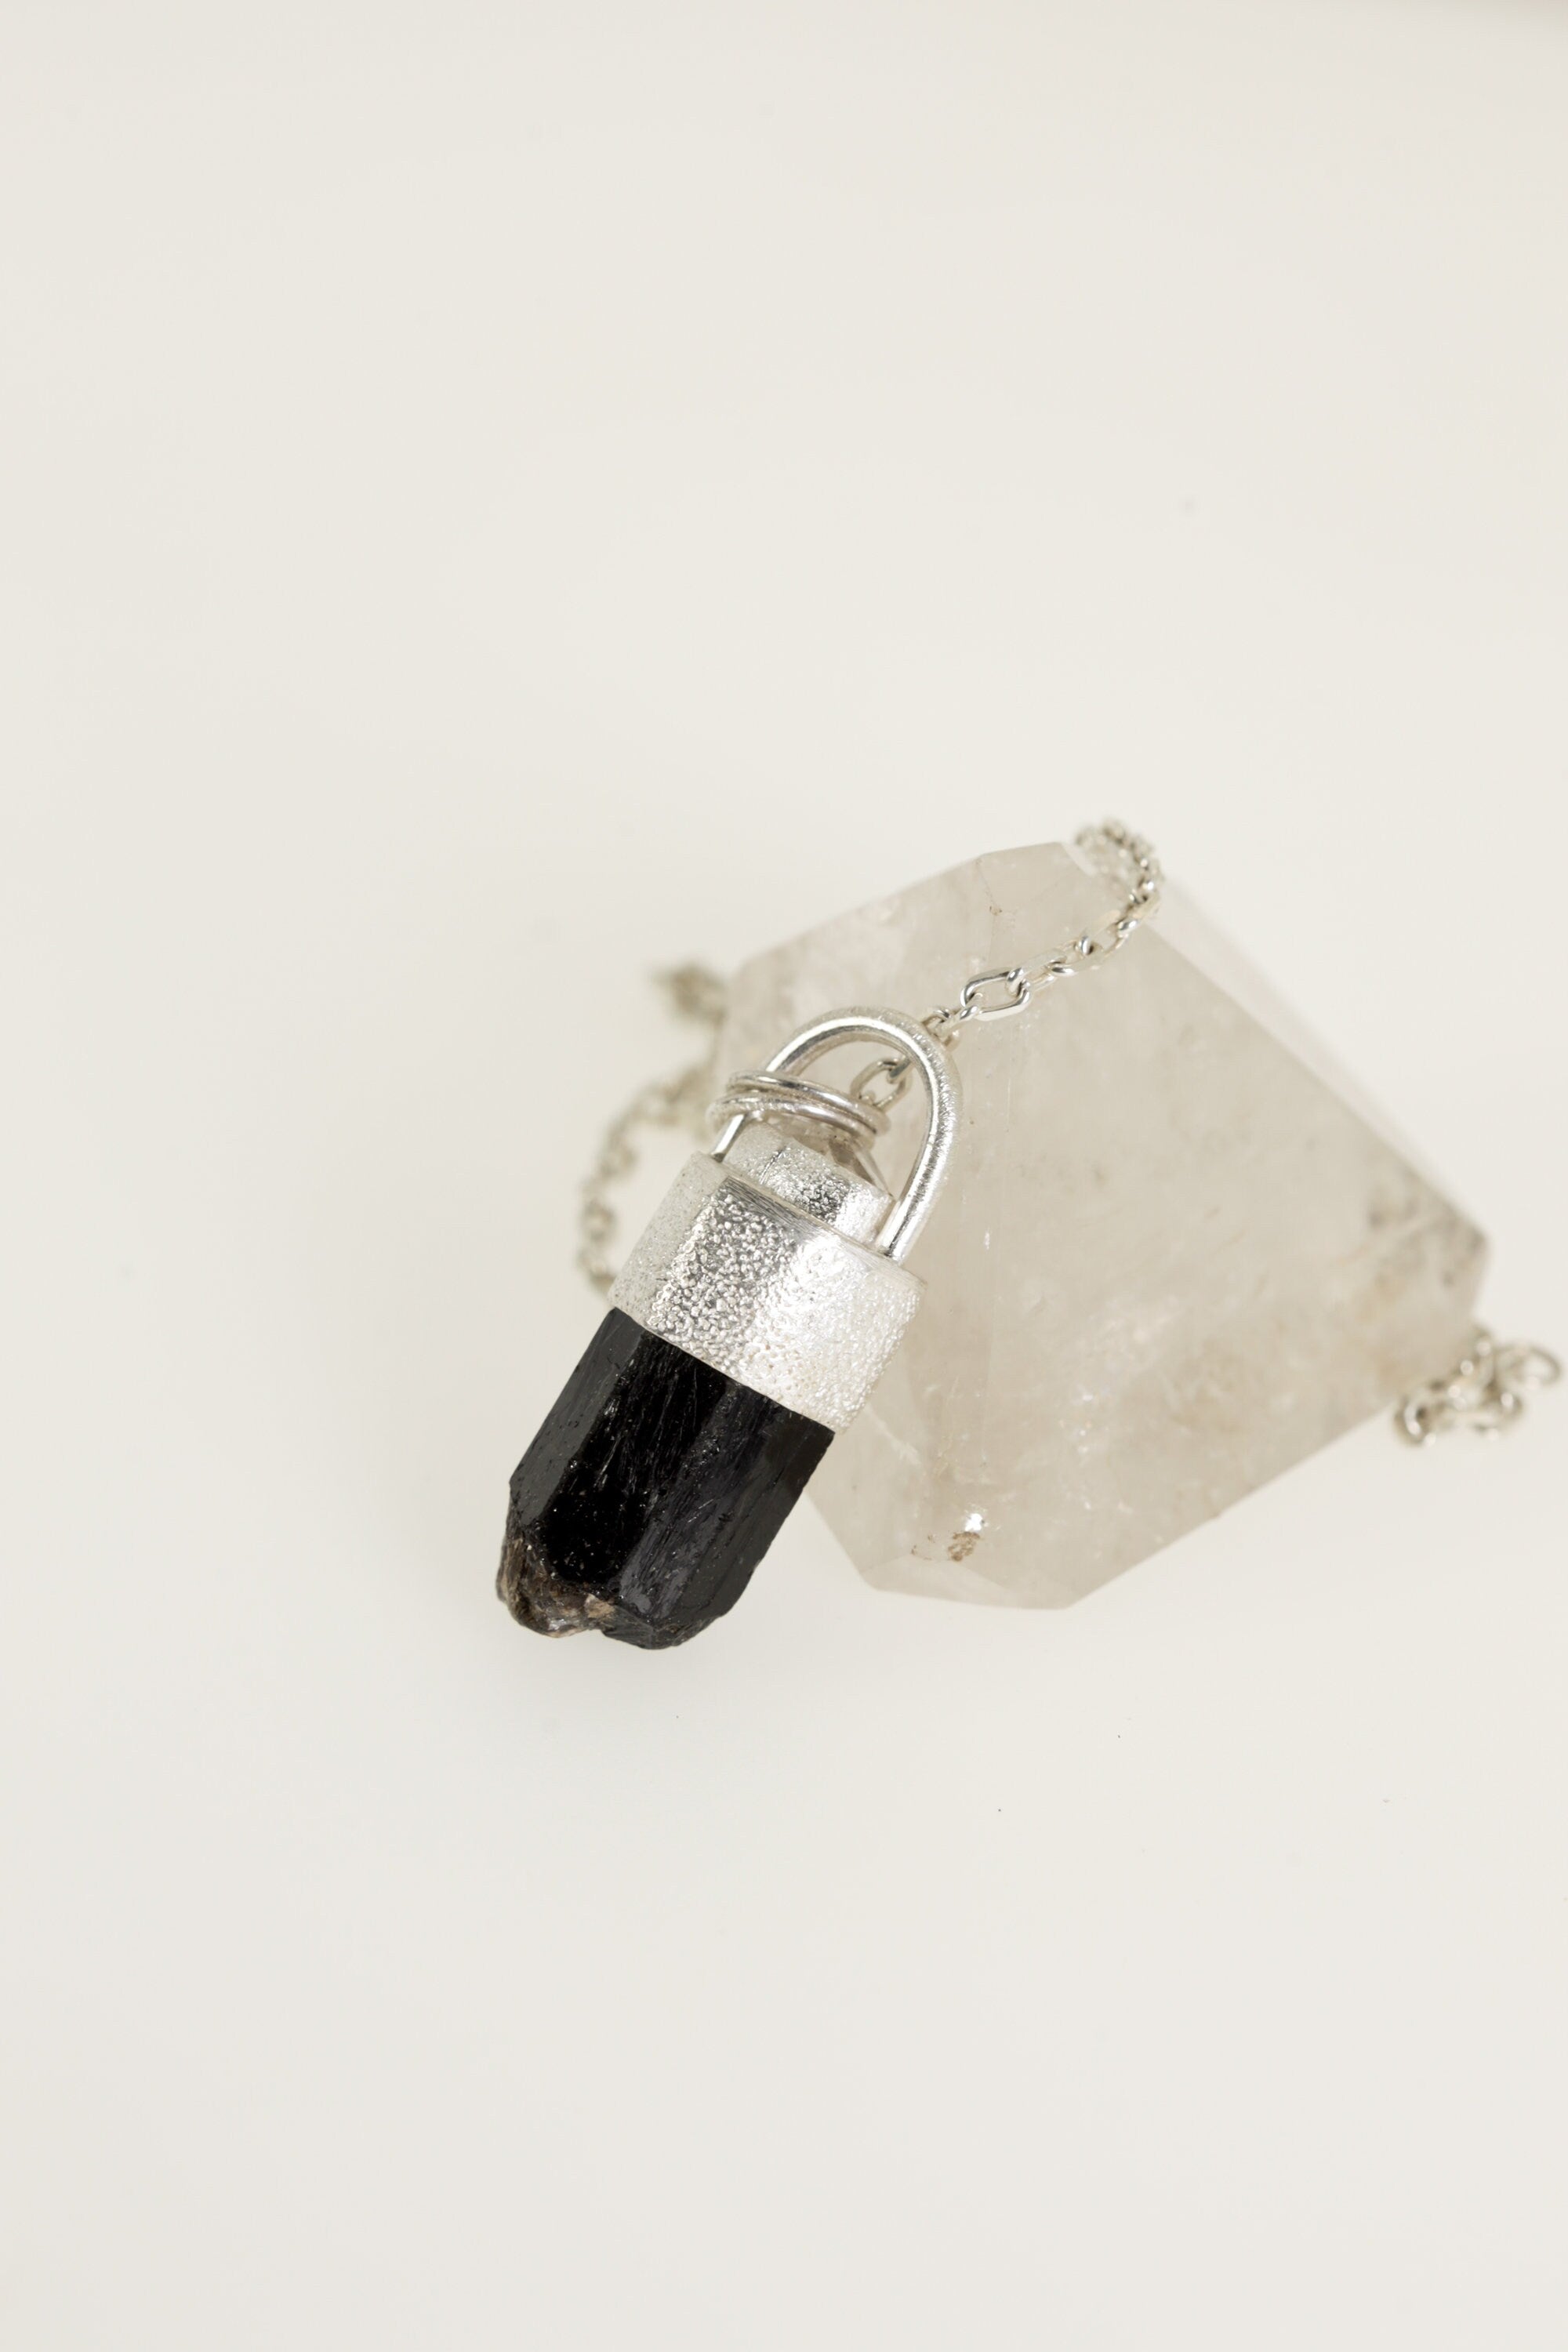 Earthen Brilliance: Sterling Silver Pendant with Himalayan Terminated Brown Dravite Tourmaline and Diamond - Sand Texture Finish - NO/08